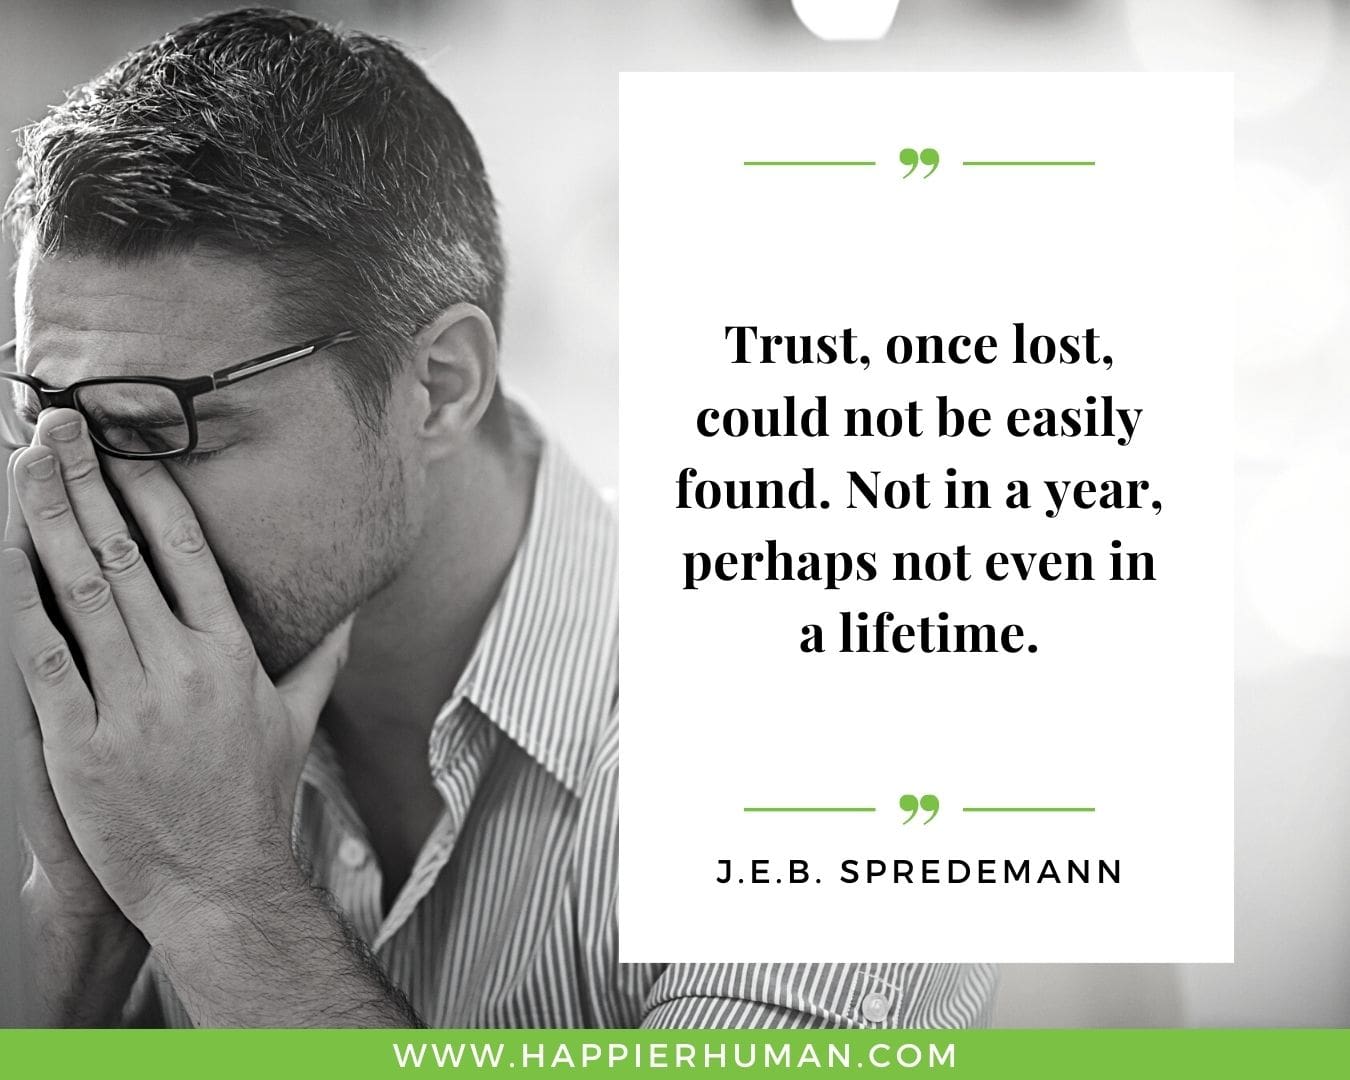 Broken Trust Quotes - “Trust, once lost, could not be easily found. Not in a year, perhaps not even in a lifetime.” - J.E.B. Spredemann